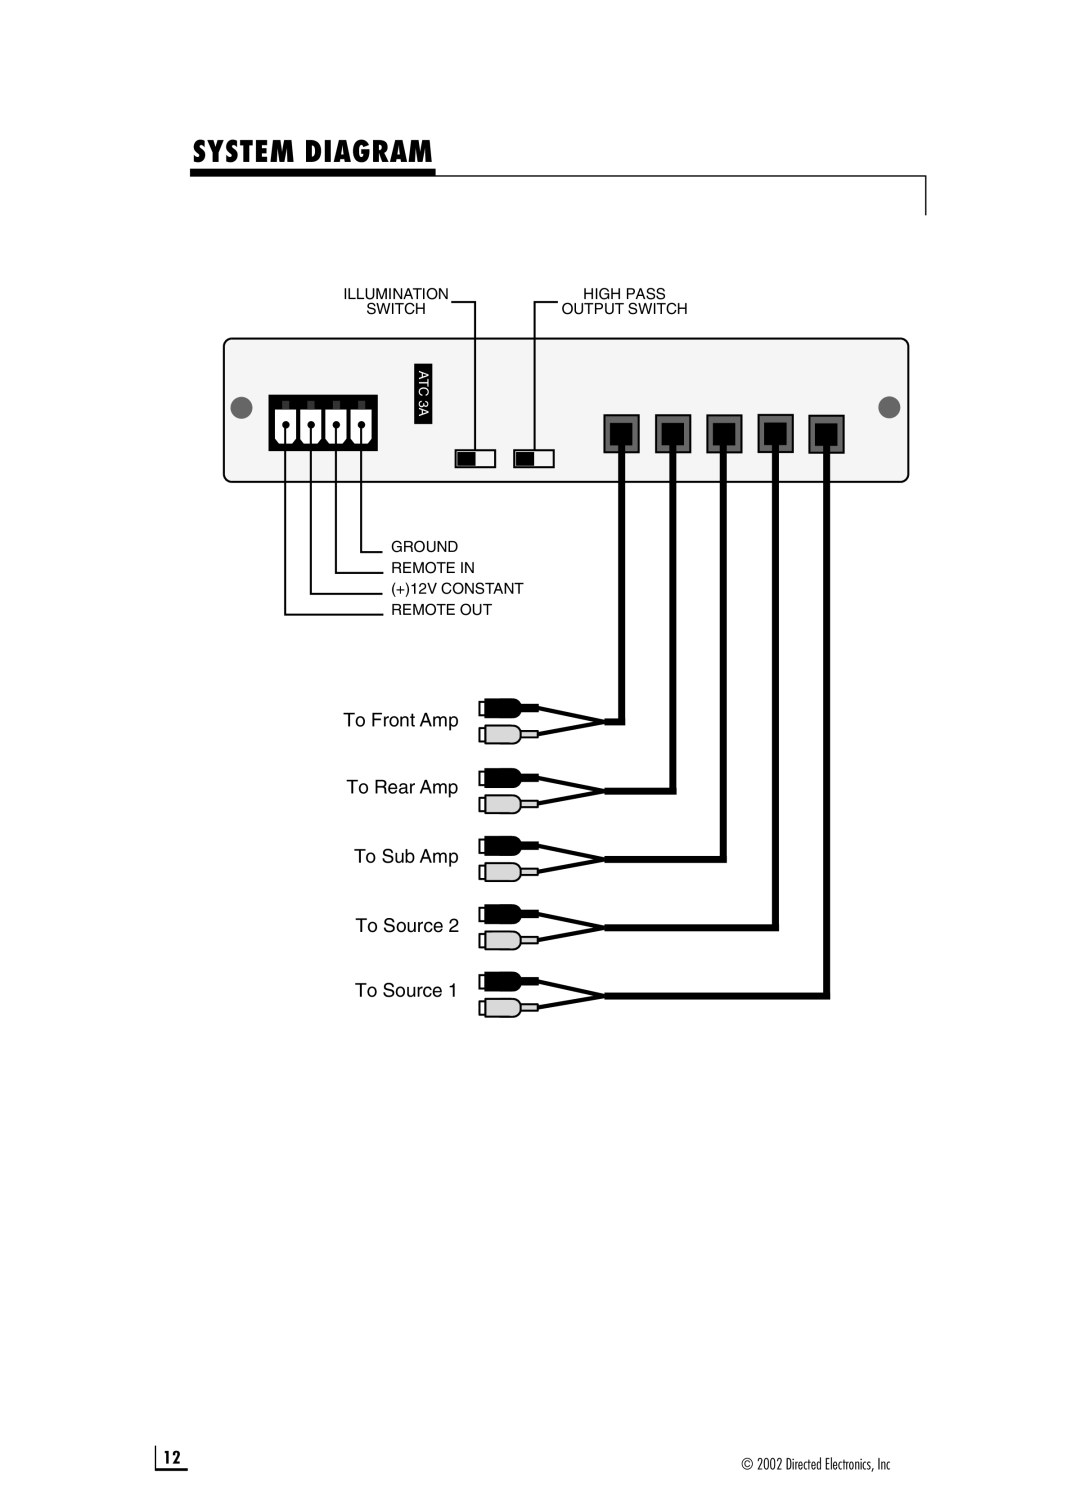 Directed Audio Model 6500 manual System Diagram, To Front Amp To Rear Amp To Sub Amp To Source To Source, ATC 3A 